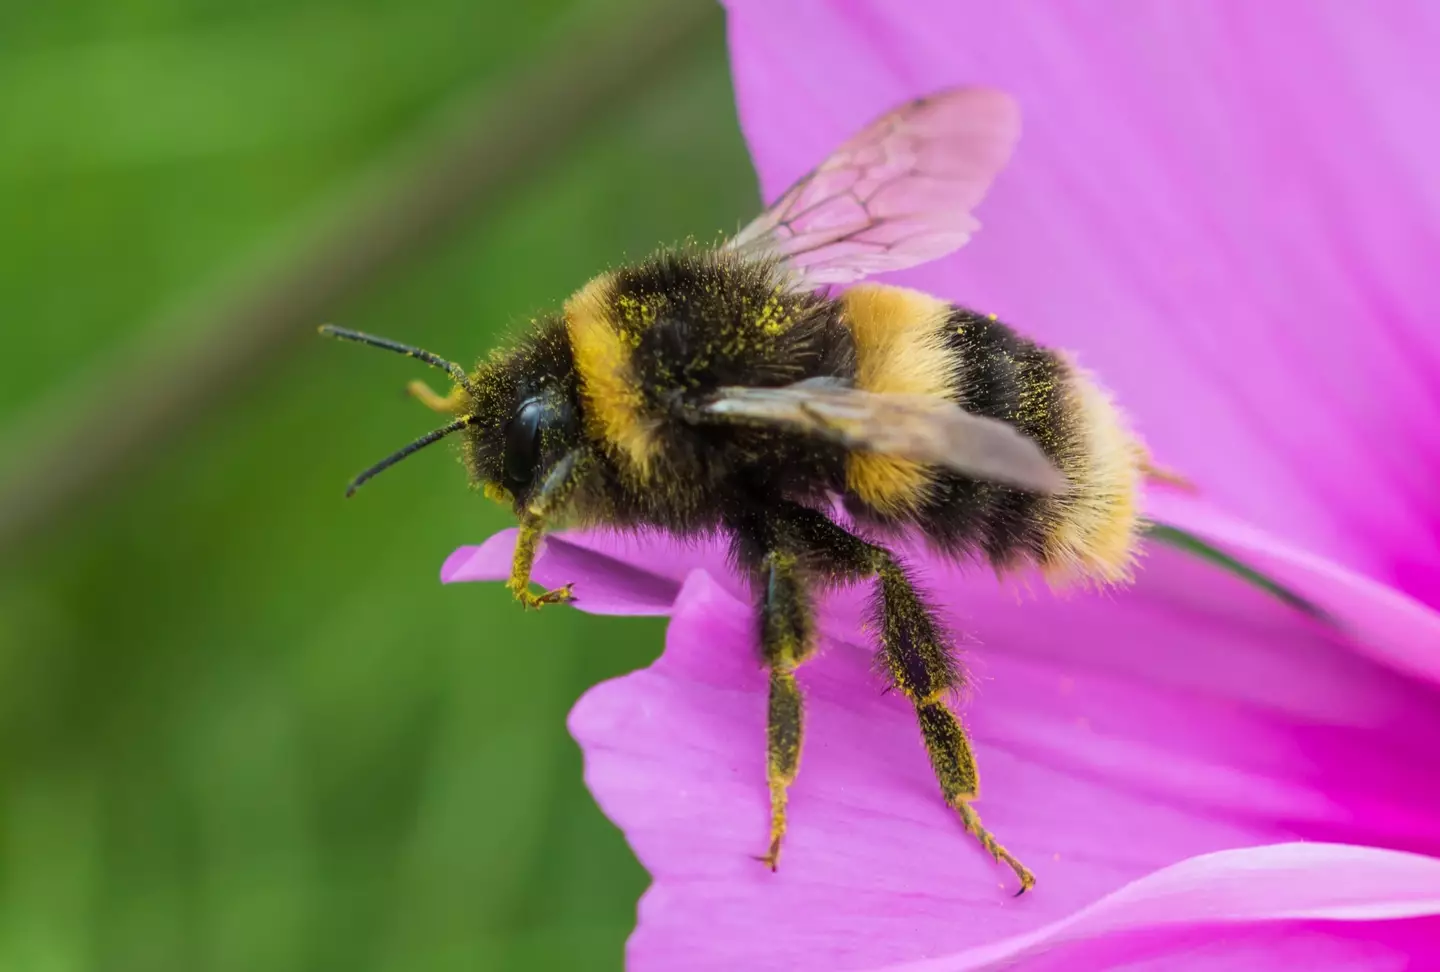 Bumblebees can now be considered fish.